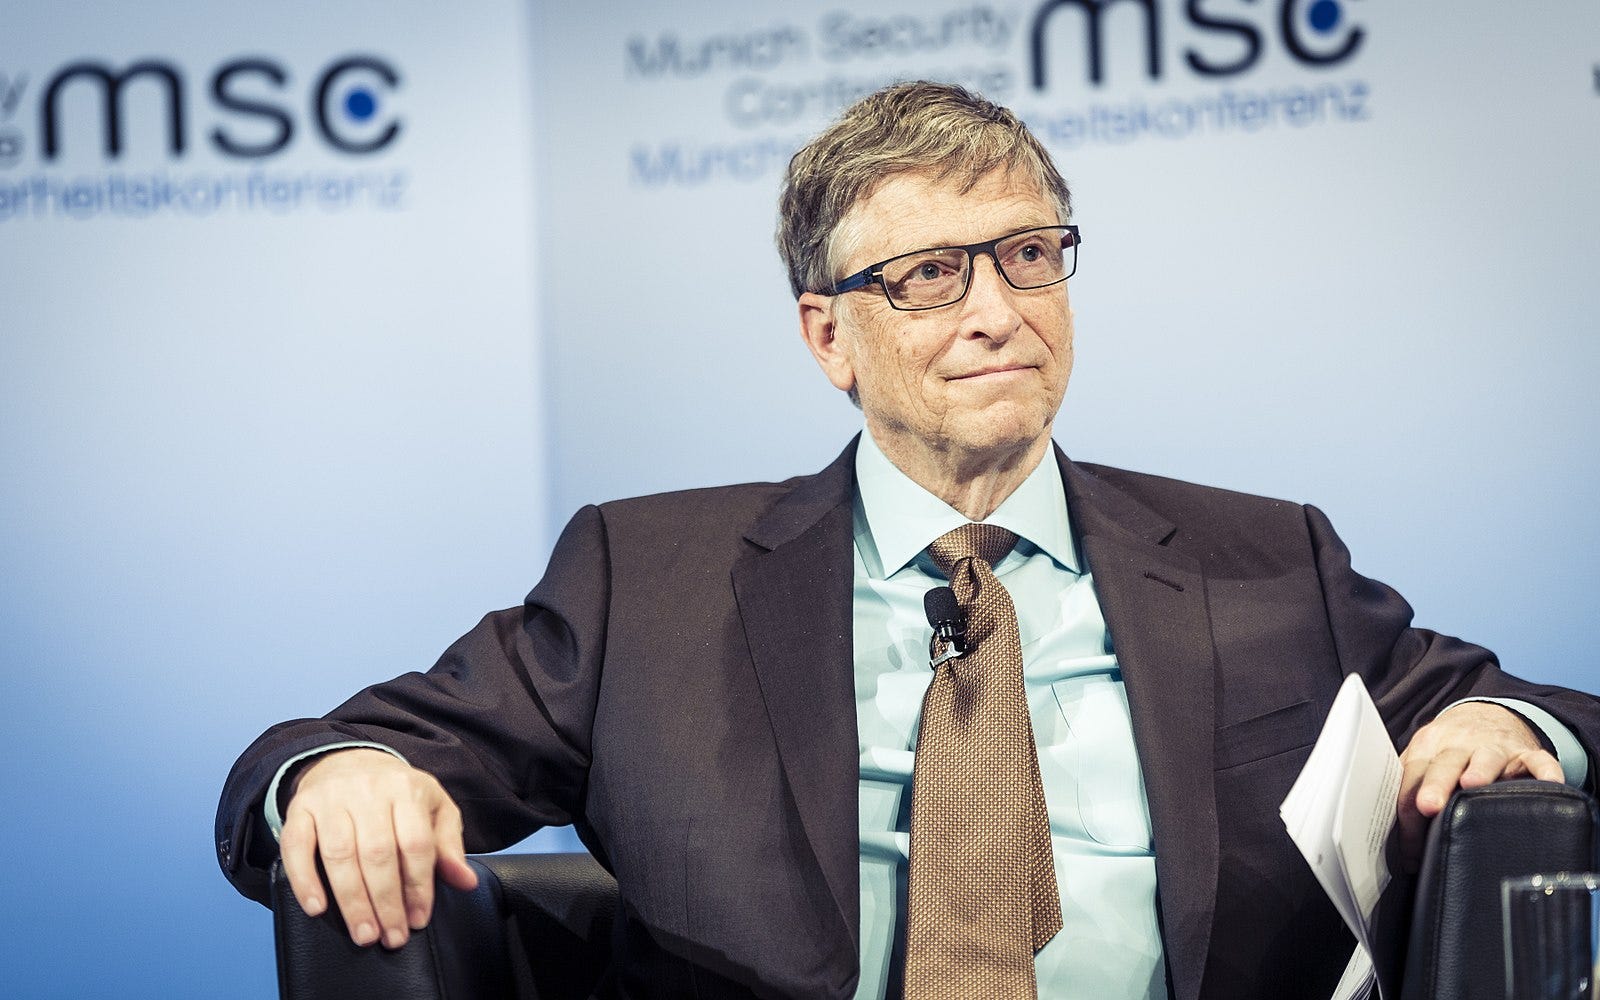 Gates Foundation Entire Focus Now On Fighting COVID-19: Barron's